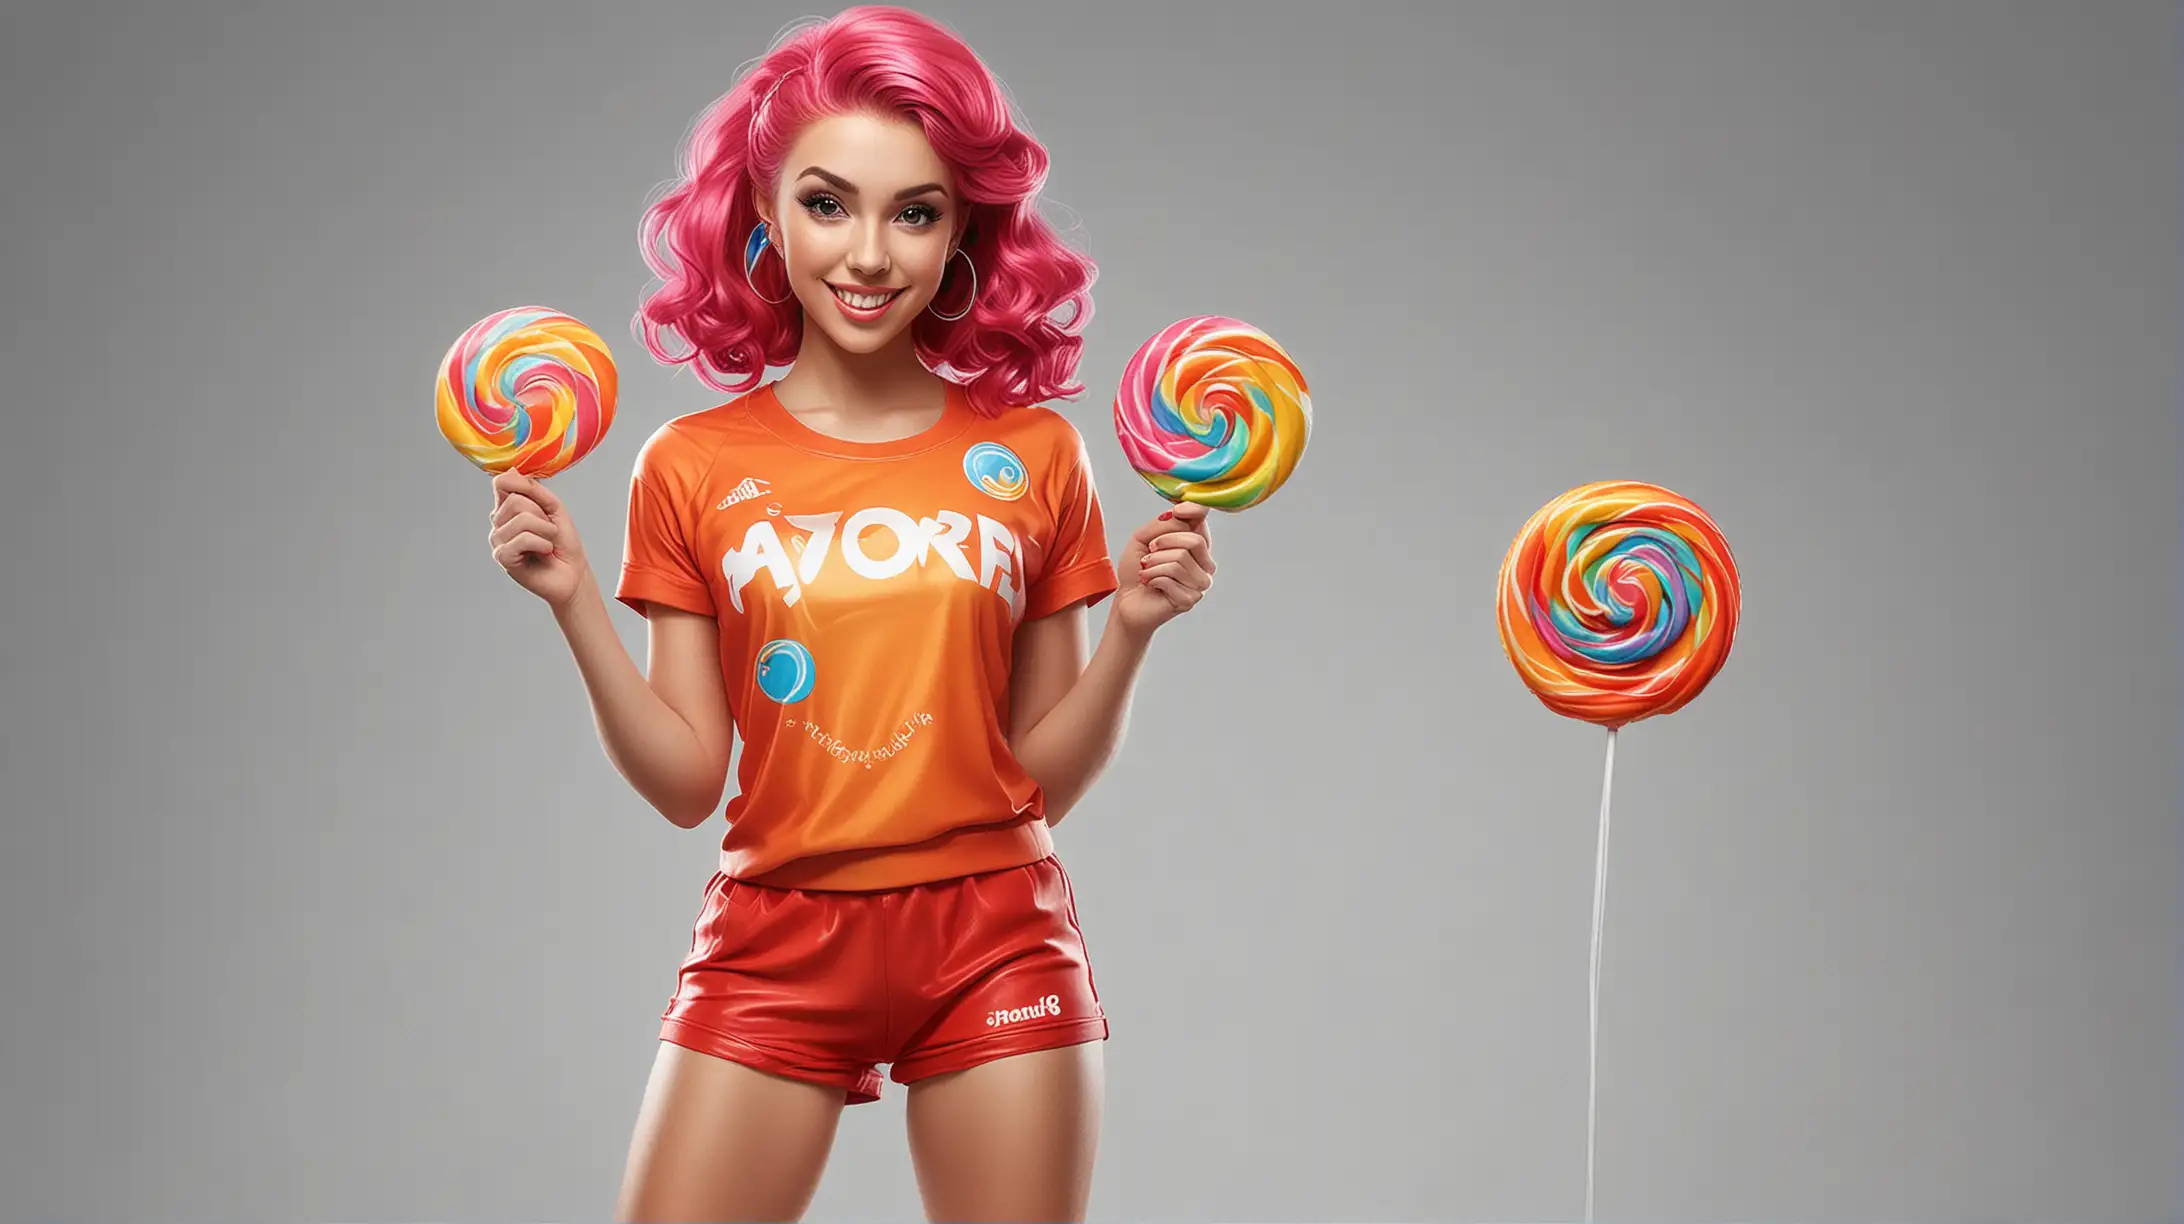 Vibrant GymReady Candy Mascot Fit 24YearOld Woman with Lollipop Head